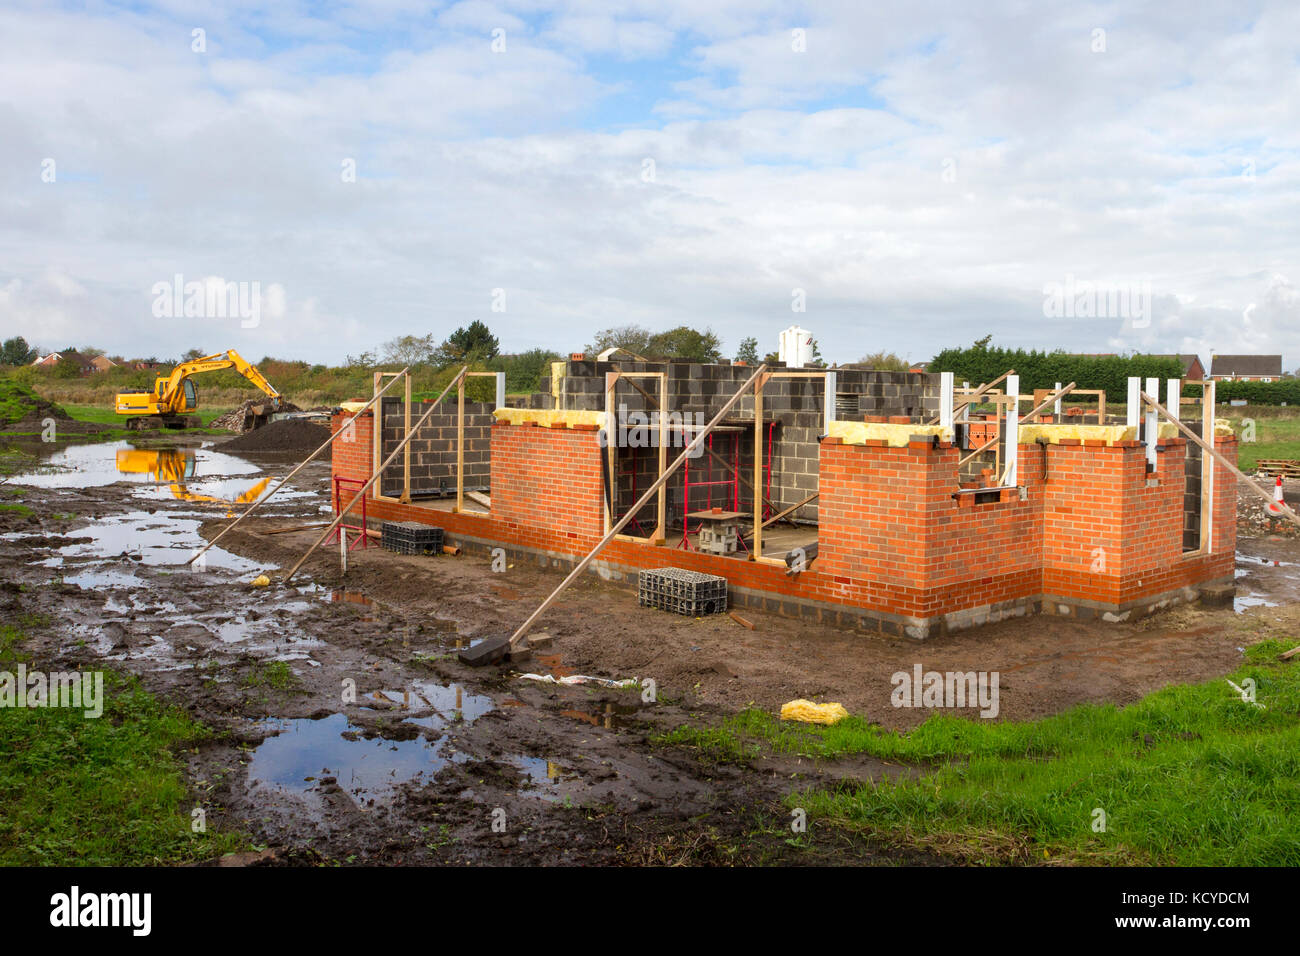 Flooded fields on a green site to provide new homes site for development in Banks, Southport, UK  Hundreds of new homes across the country have been given the green light in the past few years despite official warnings they will be at risk of flooding. Stock Photo